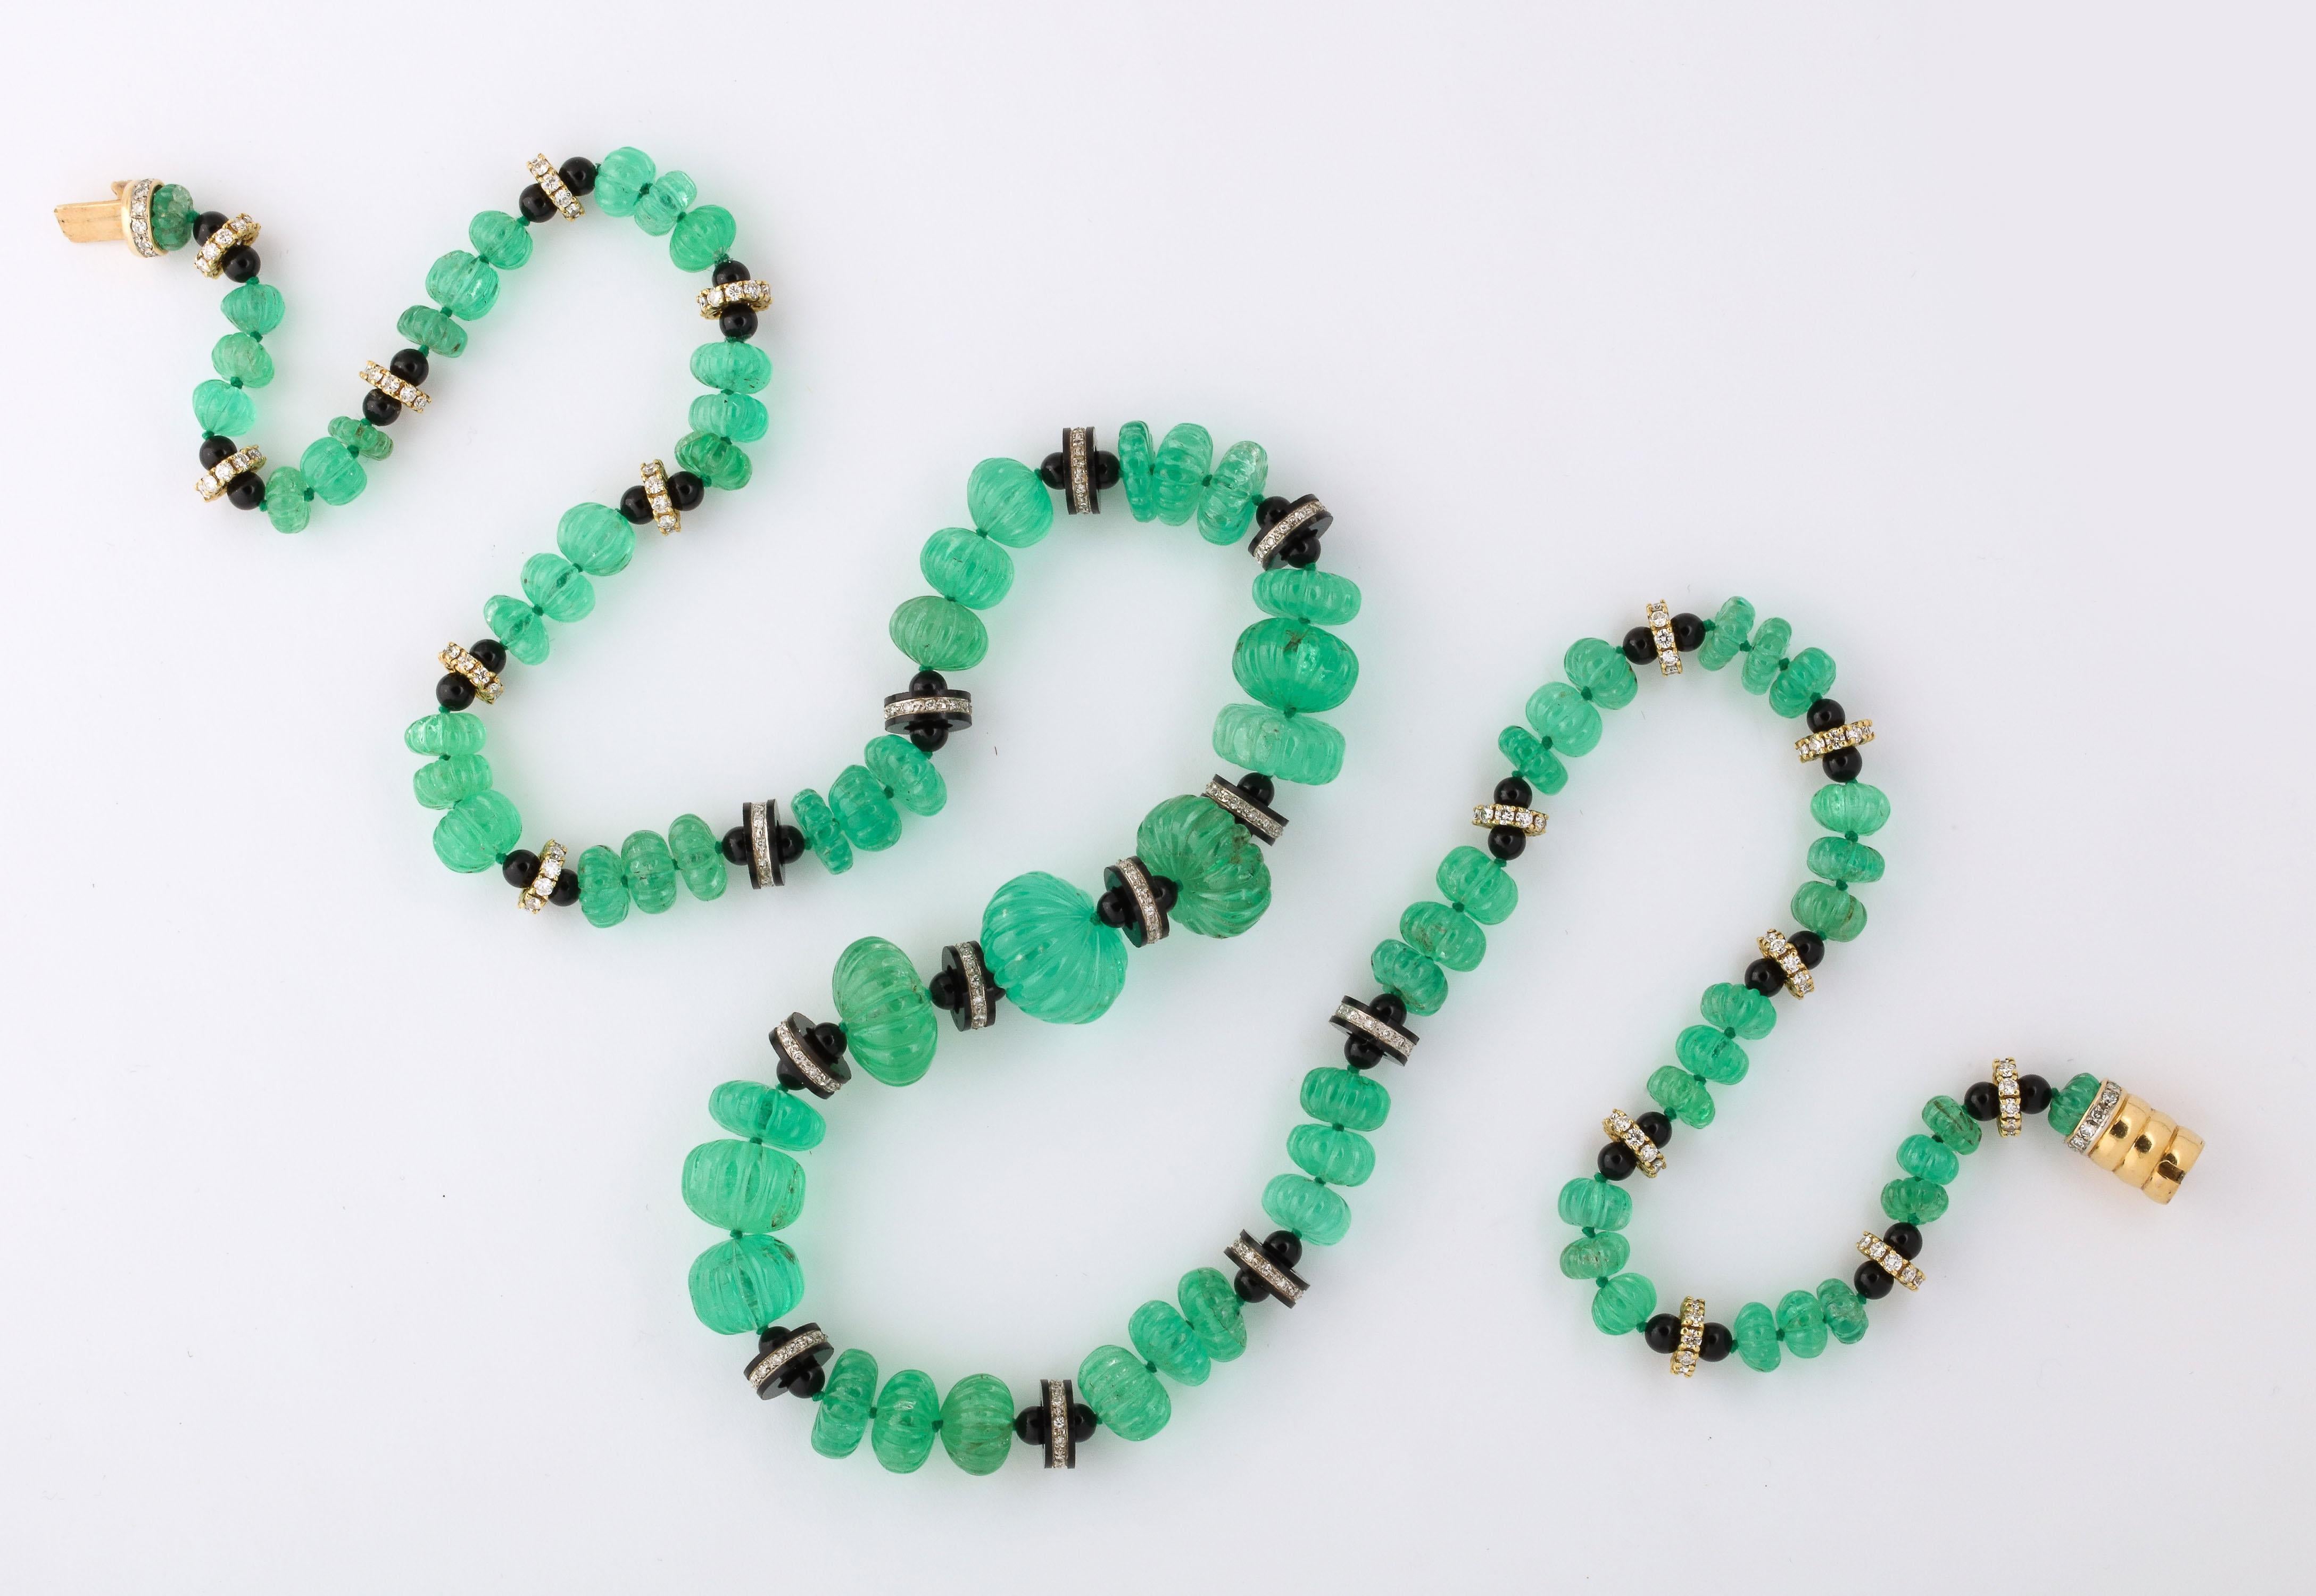 Women's Necklace of Graduated Melon Shaped Emerald Beads with Onyx and Diamond Spacers